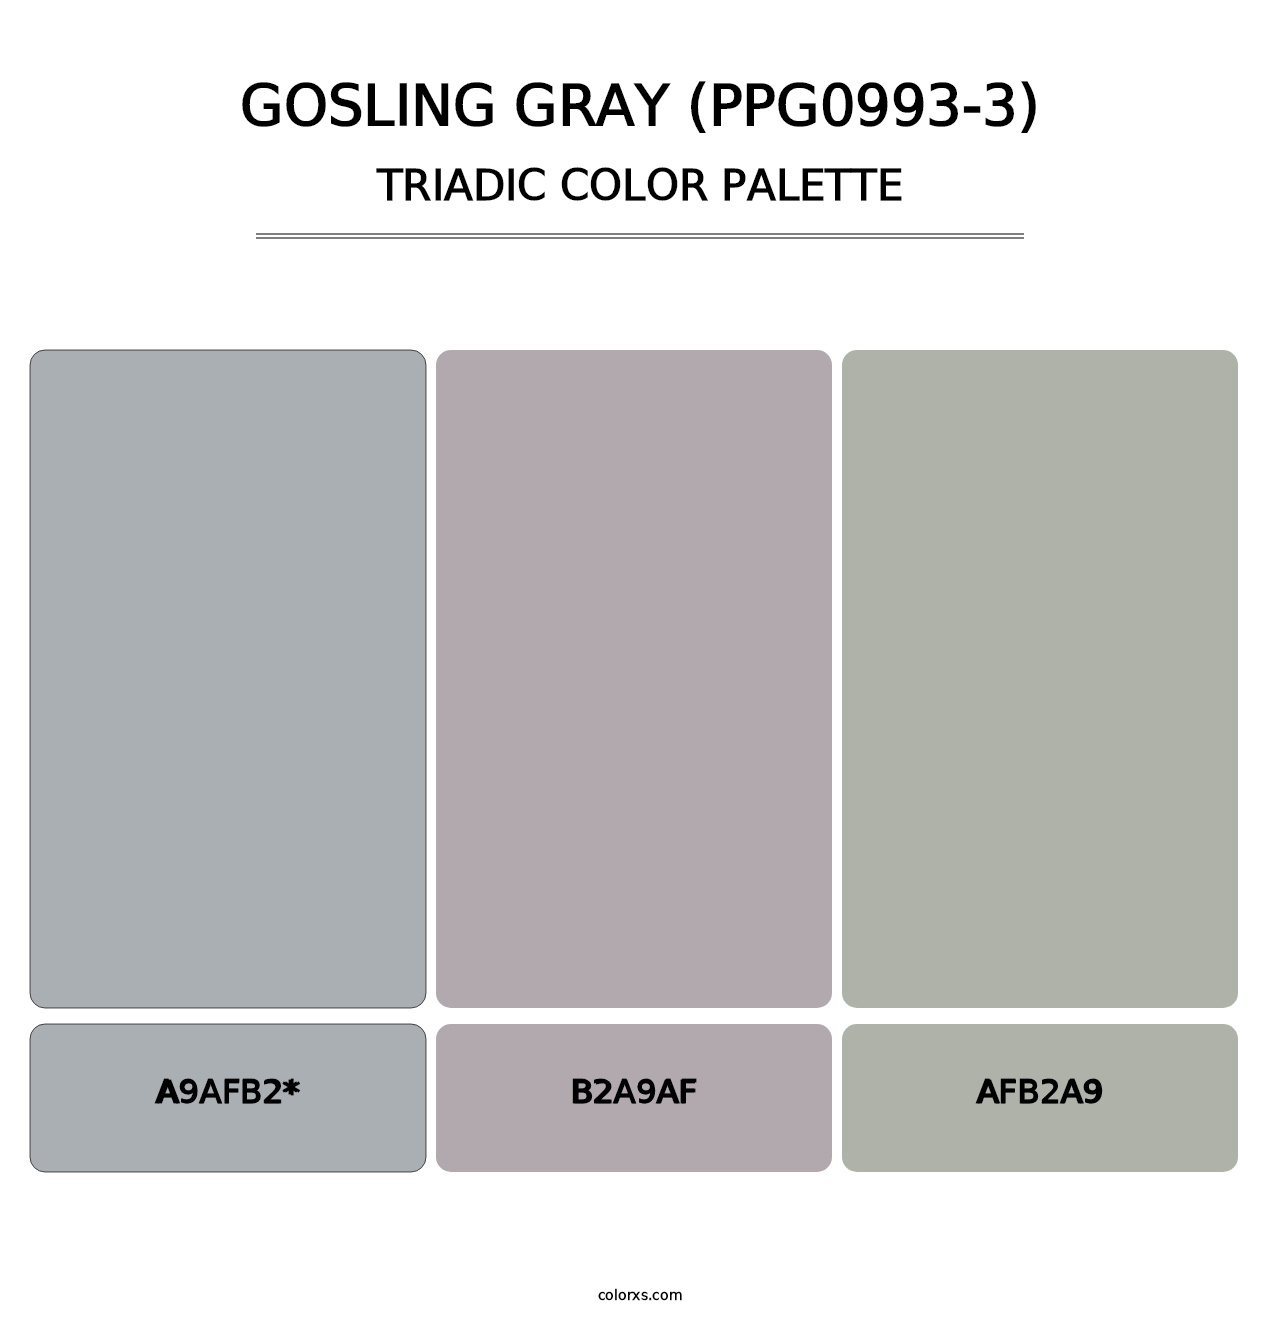 Gosling Gray (PPG0993-3) - Triadic Color Palette